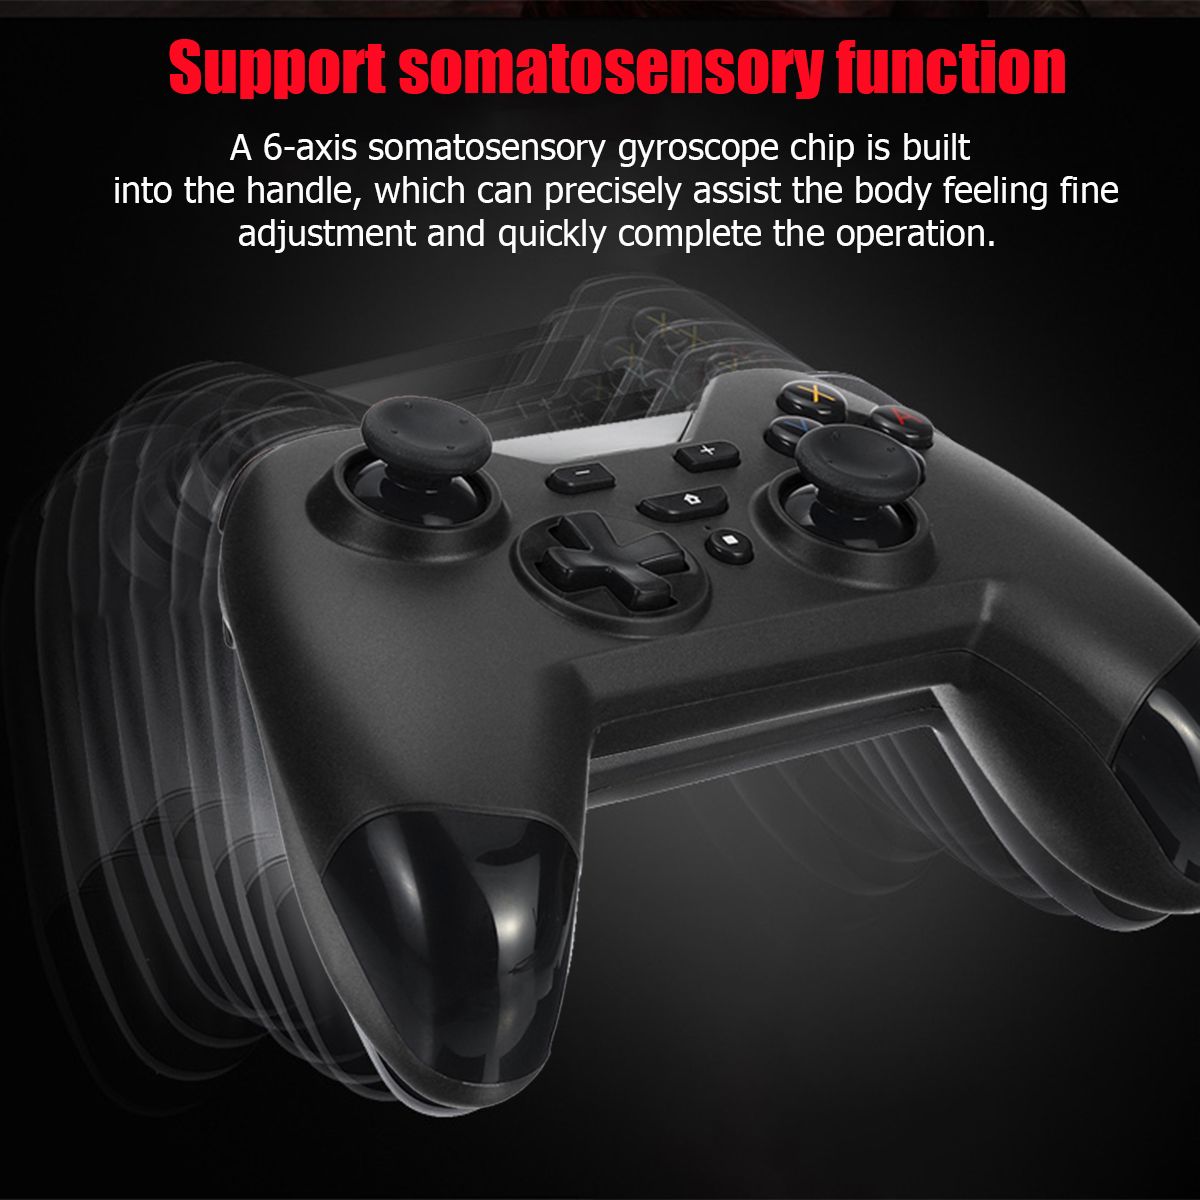 Wireless-Bluetooth-Game-Controller-Gamepad-Support-Turbo-Gyro-Axis-Vibration-Feedback-for-Nintendo-S-1749113